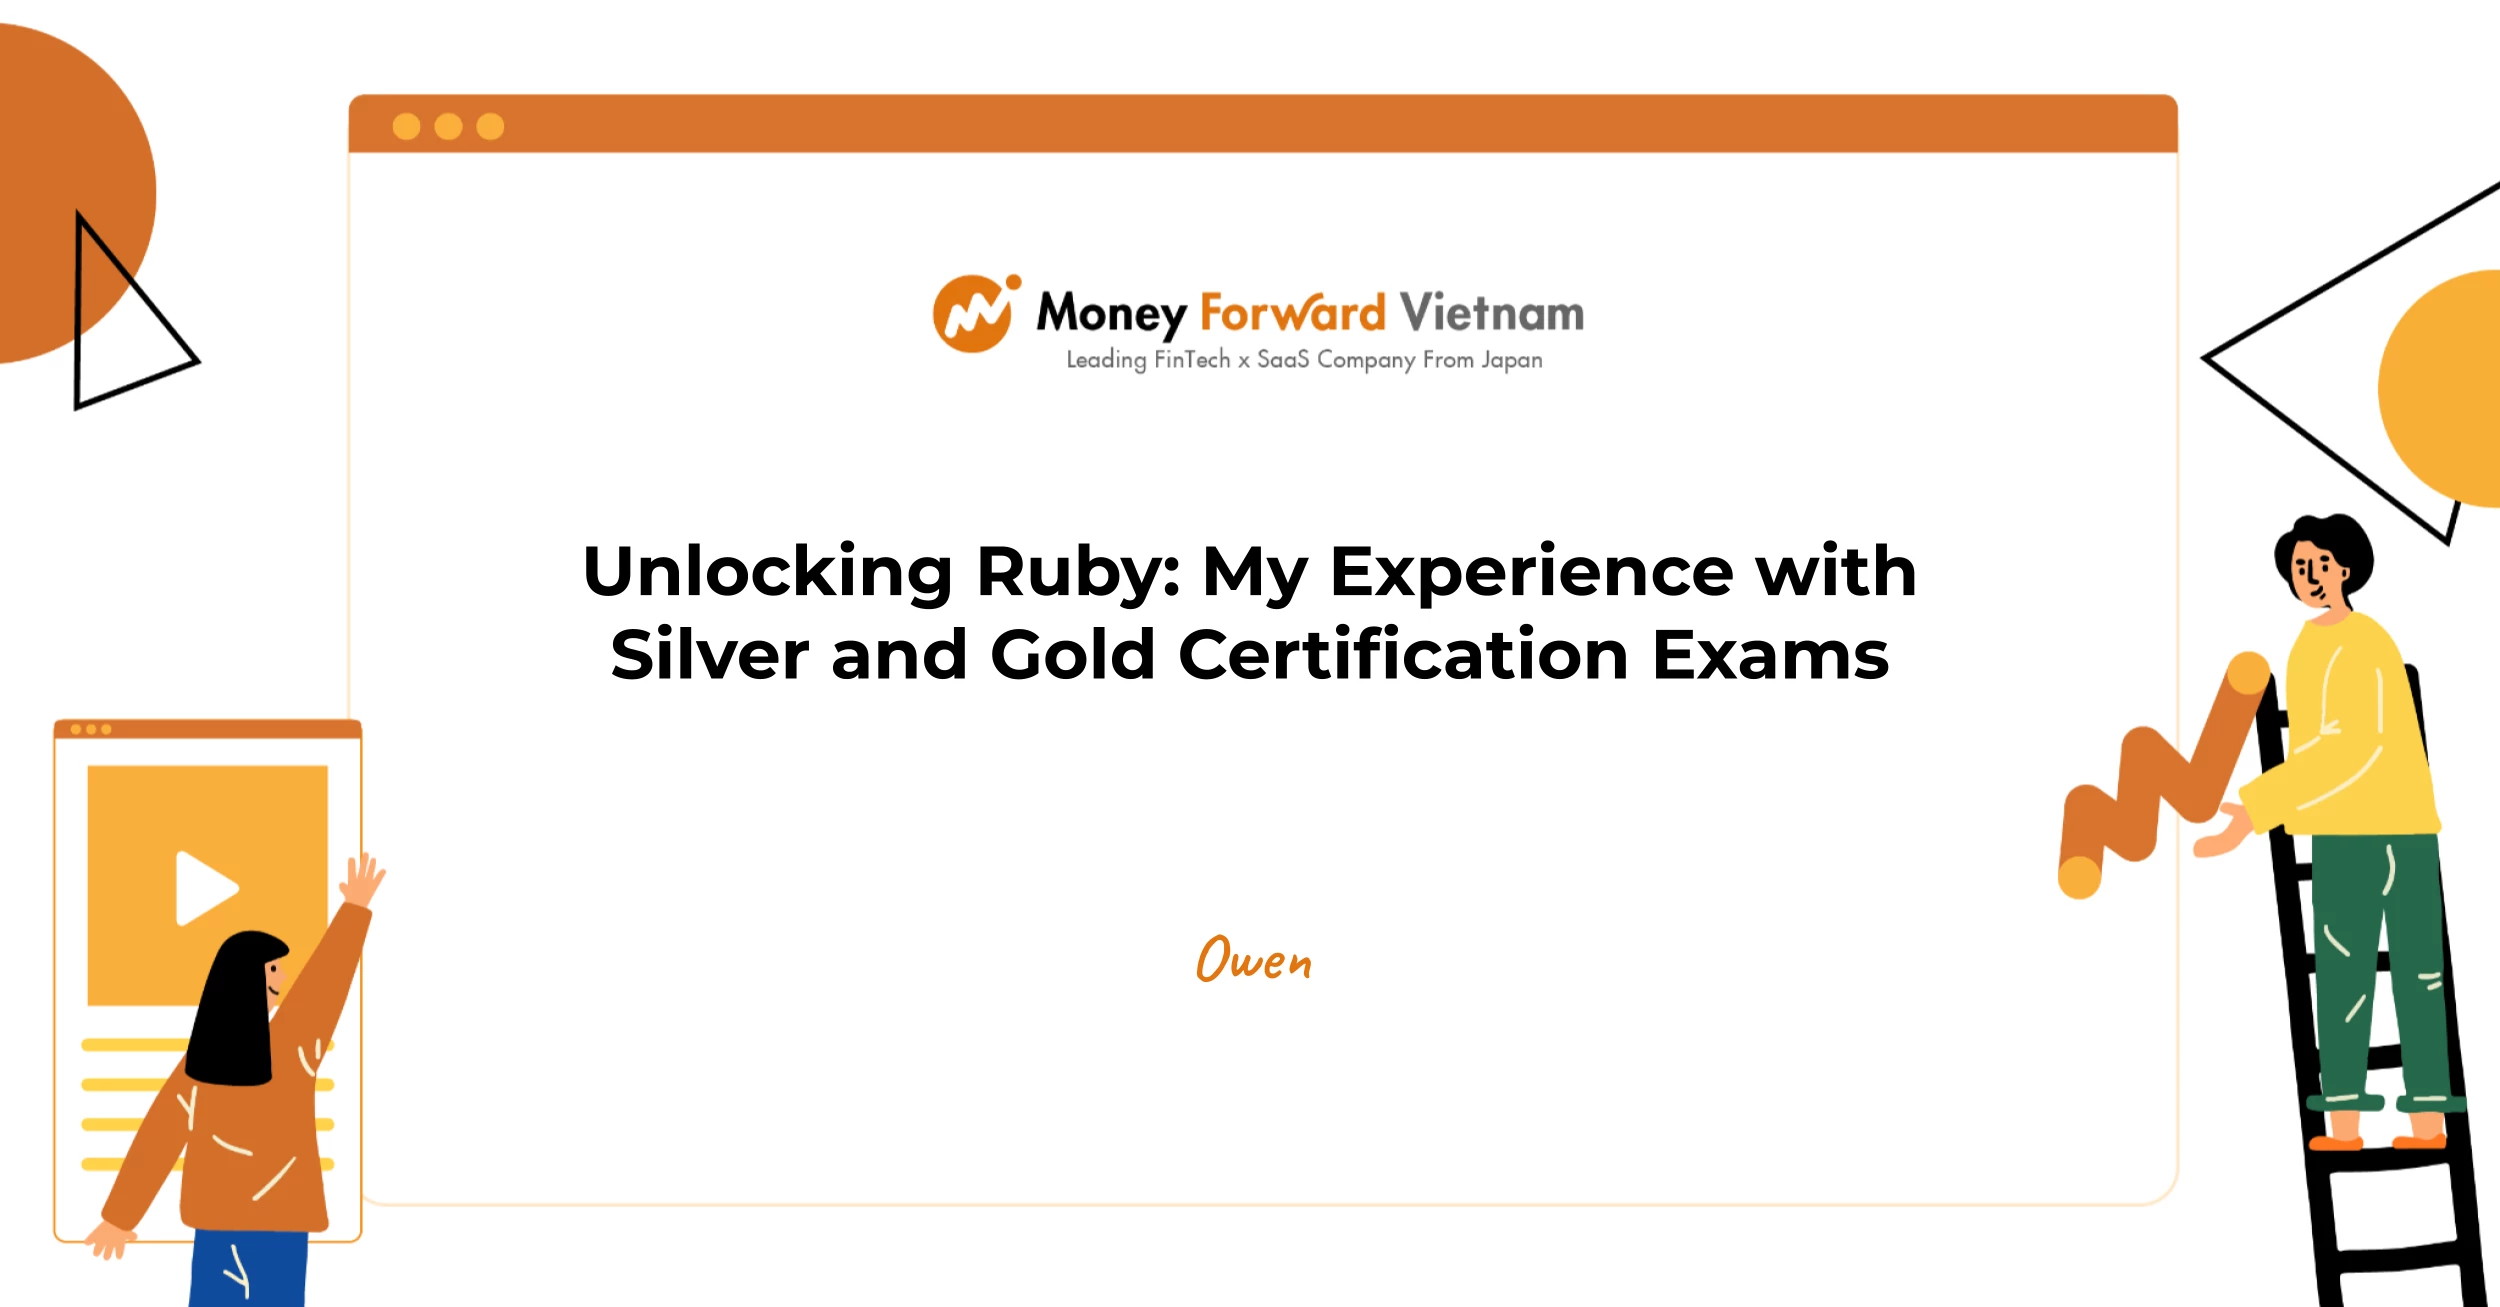 Unlocking Ruby: My Experience with Silver and Gold Certification Exams